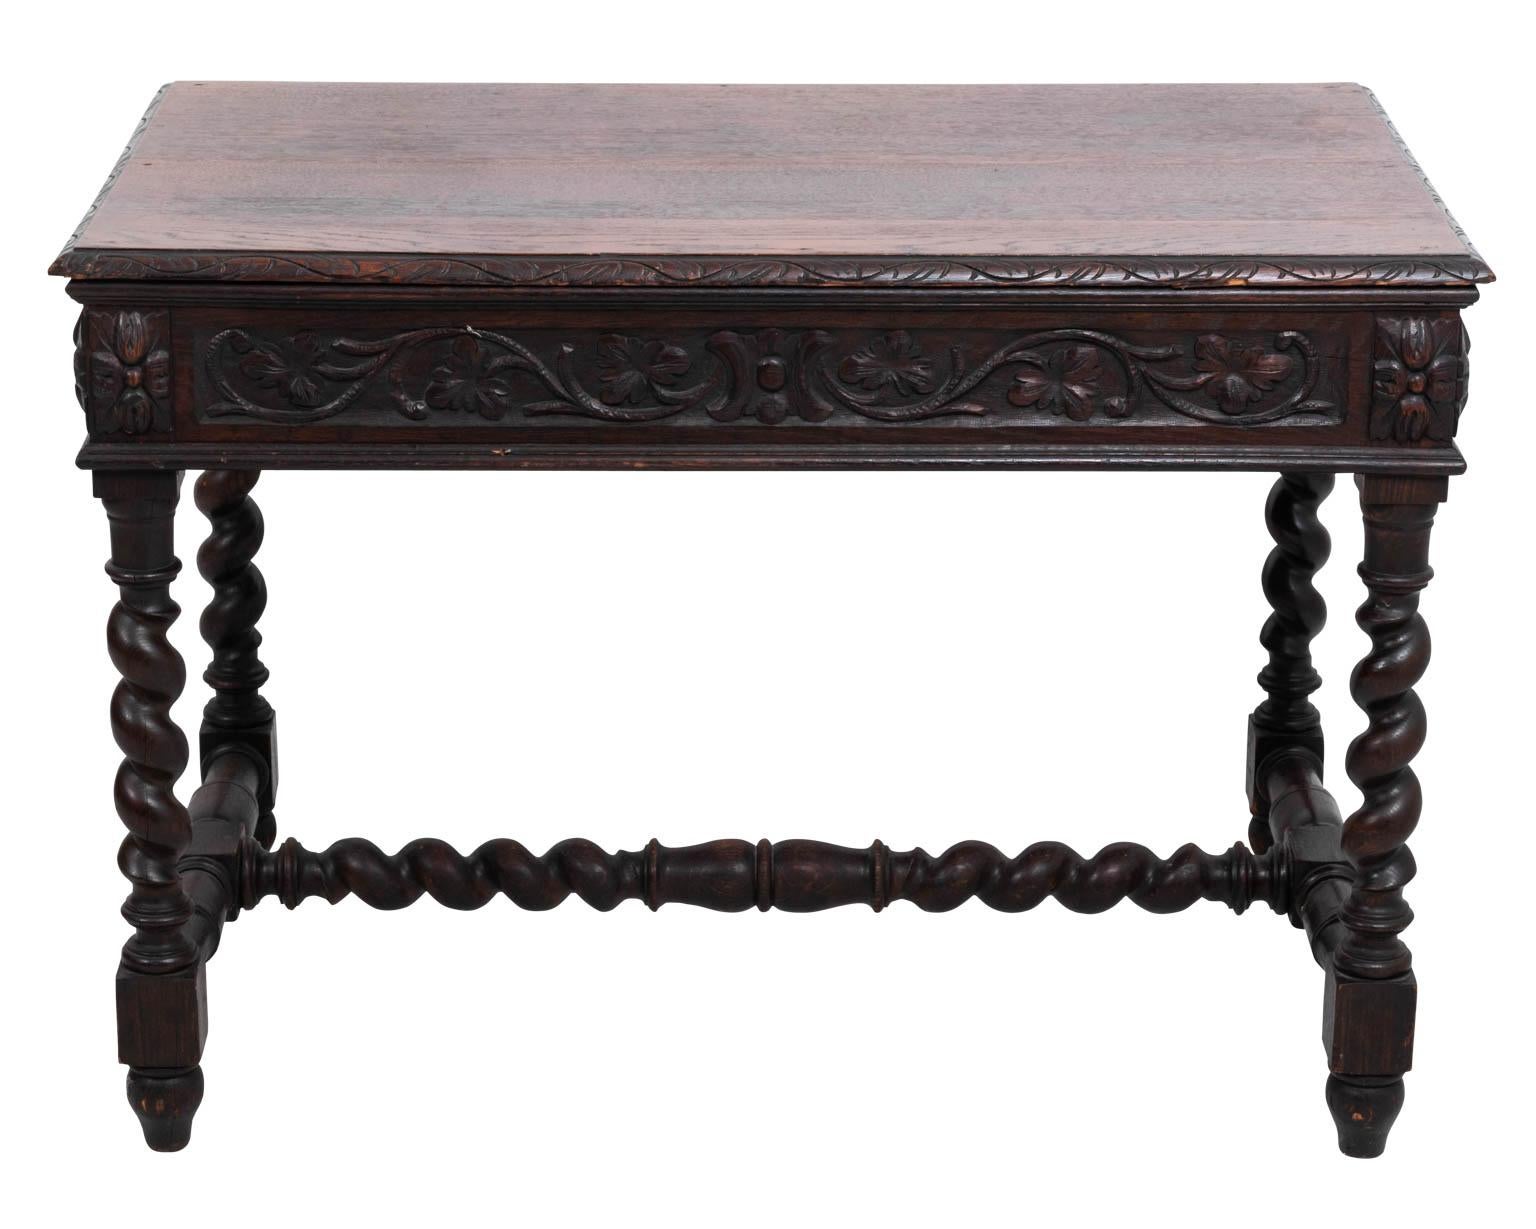 Carved oakwood one drawer table with barley twist legs and H-shaped cross stretcher. The piece also features carved figures on the drawer fronts. Please note of wear consistent with age including chips, dents, and finish loss.